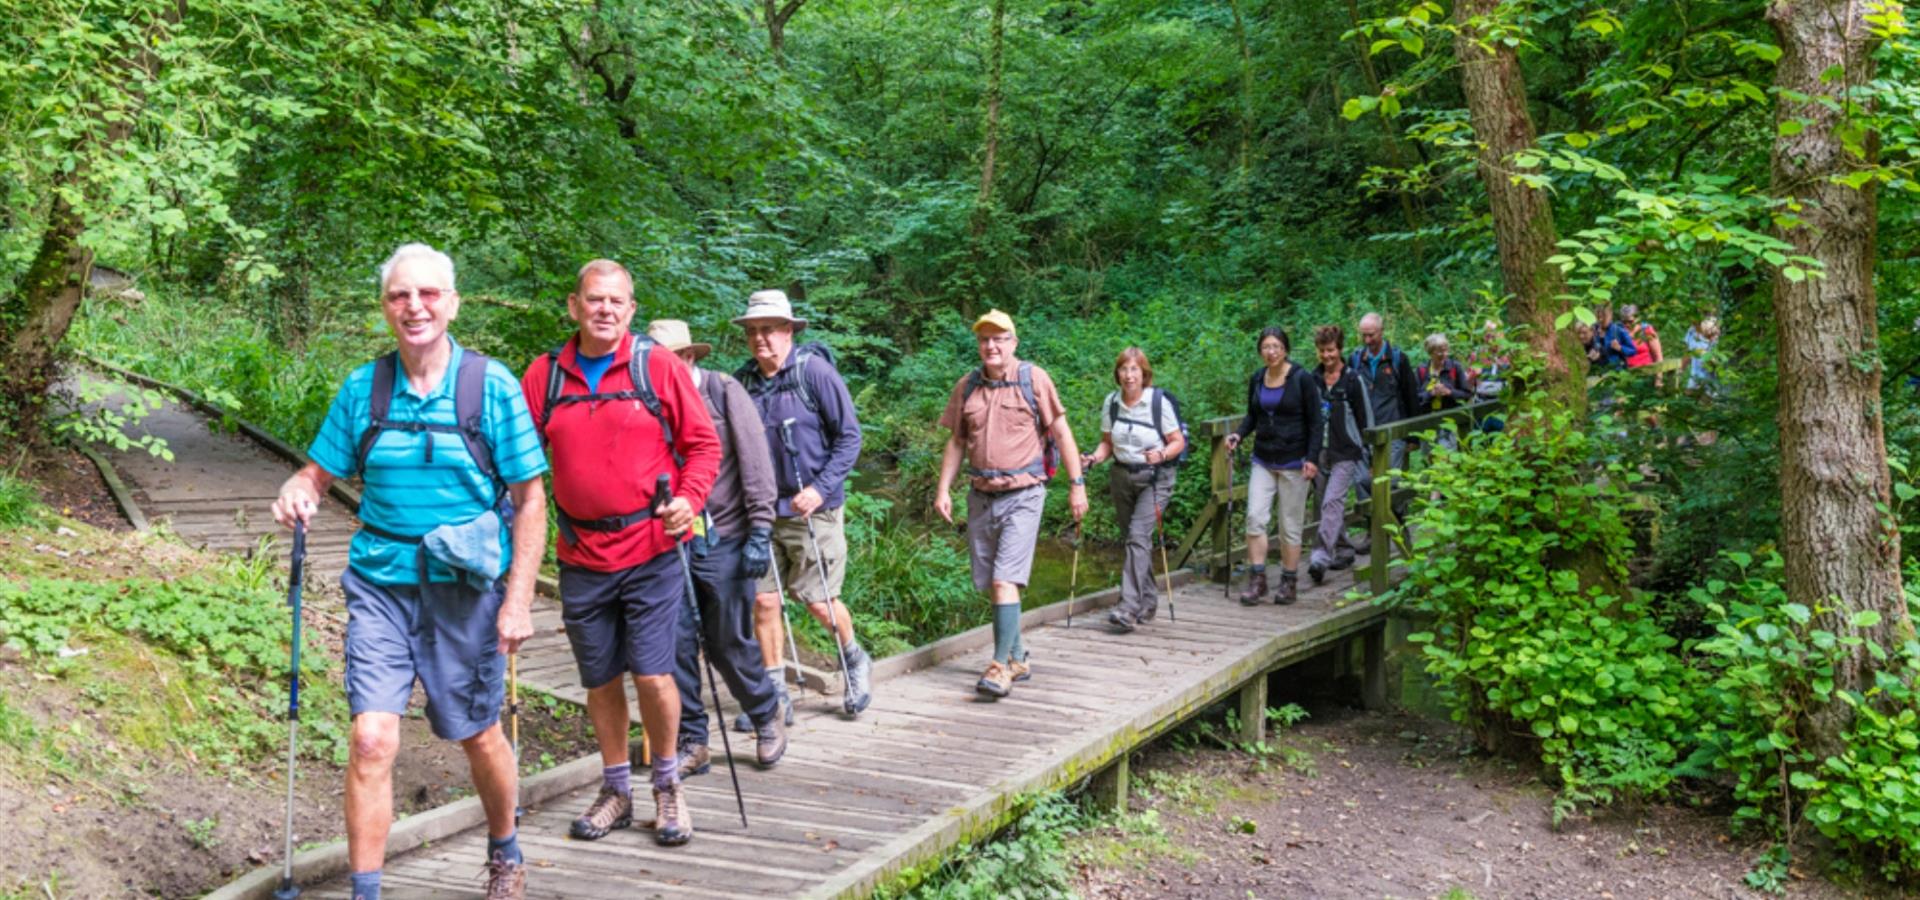 An image of walkers in Forge Valley by Richard Burdon